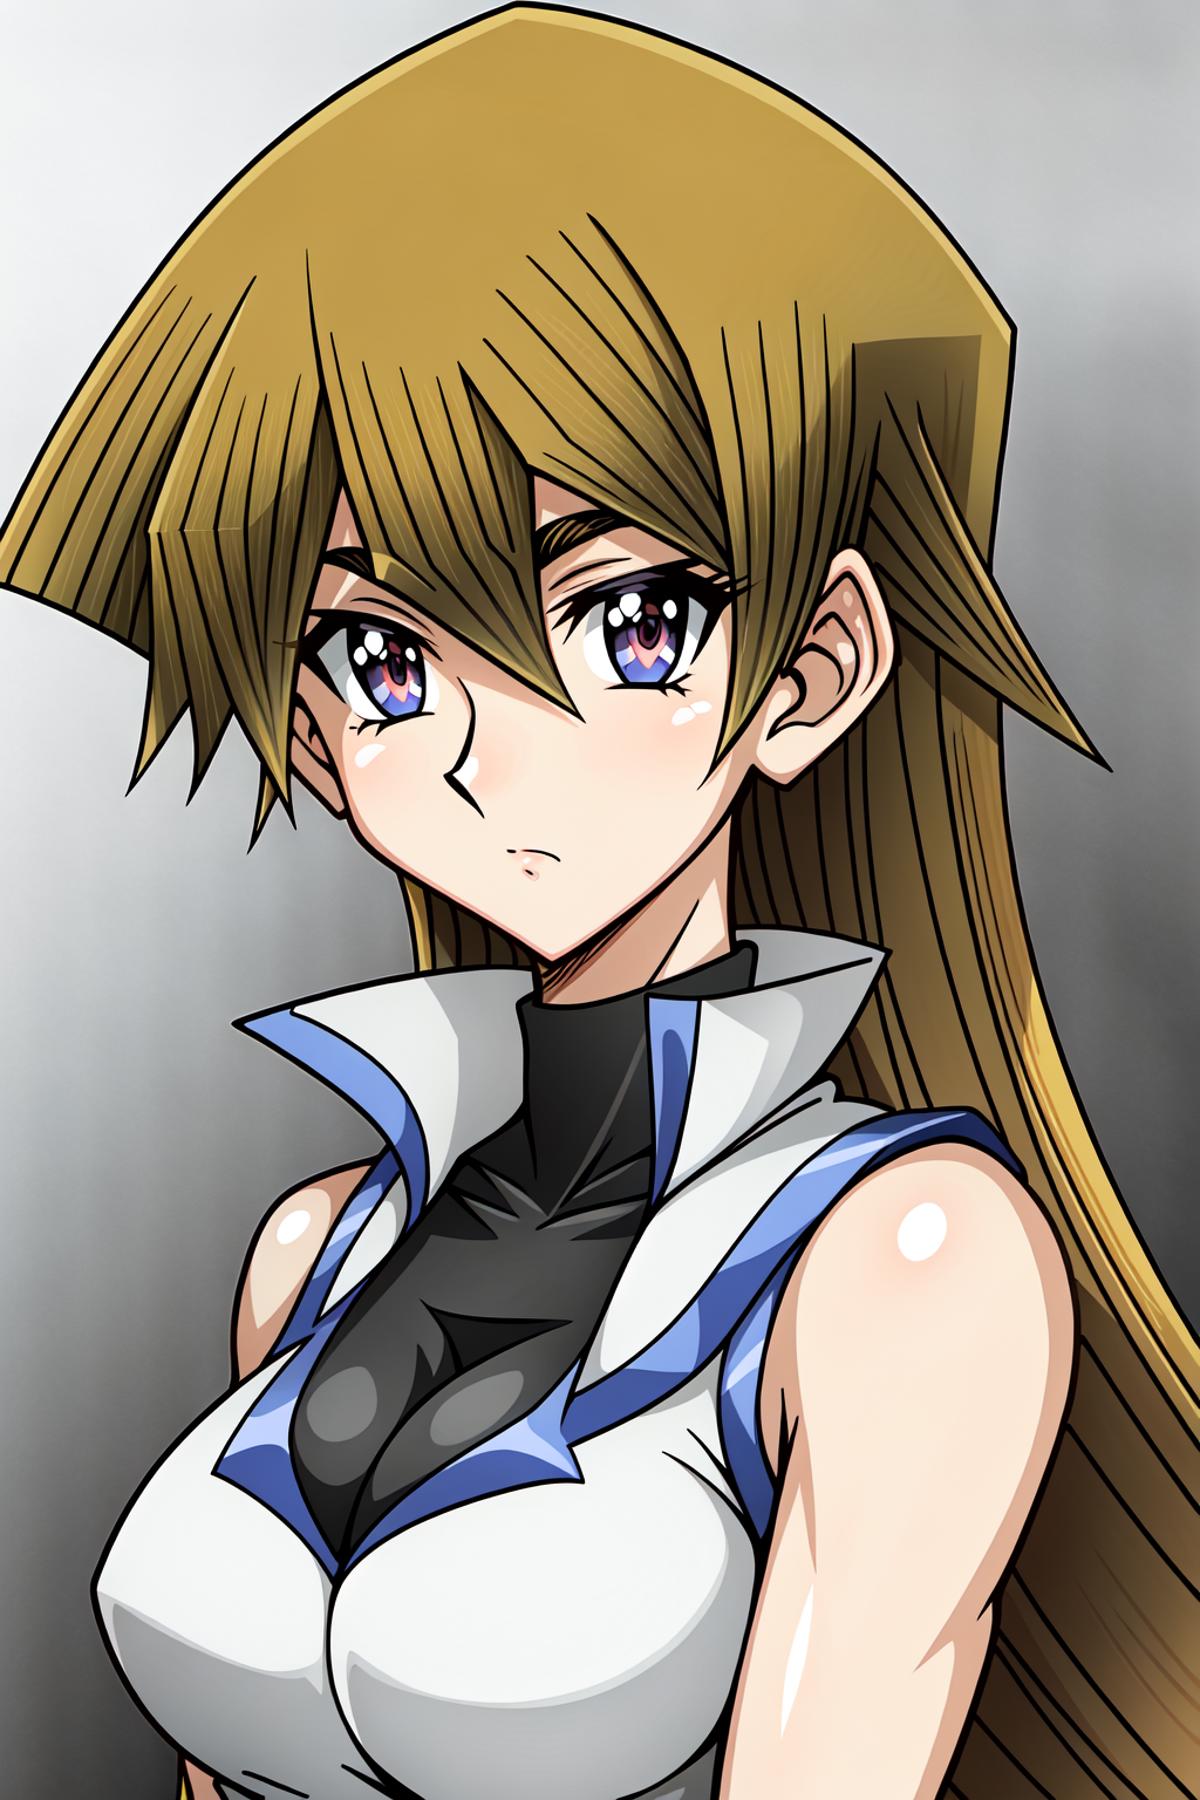 Alexis Rhodes | Yu-Gi-Oh! GX image by OG_Turles